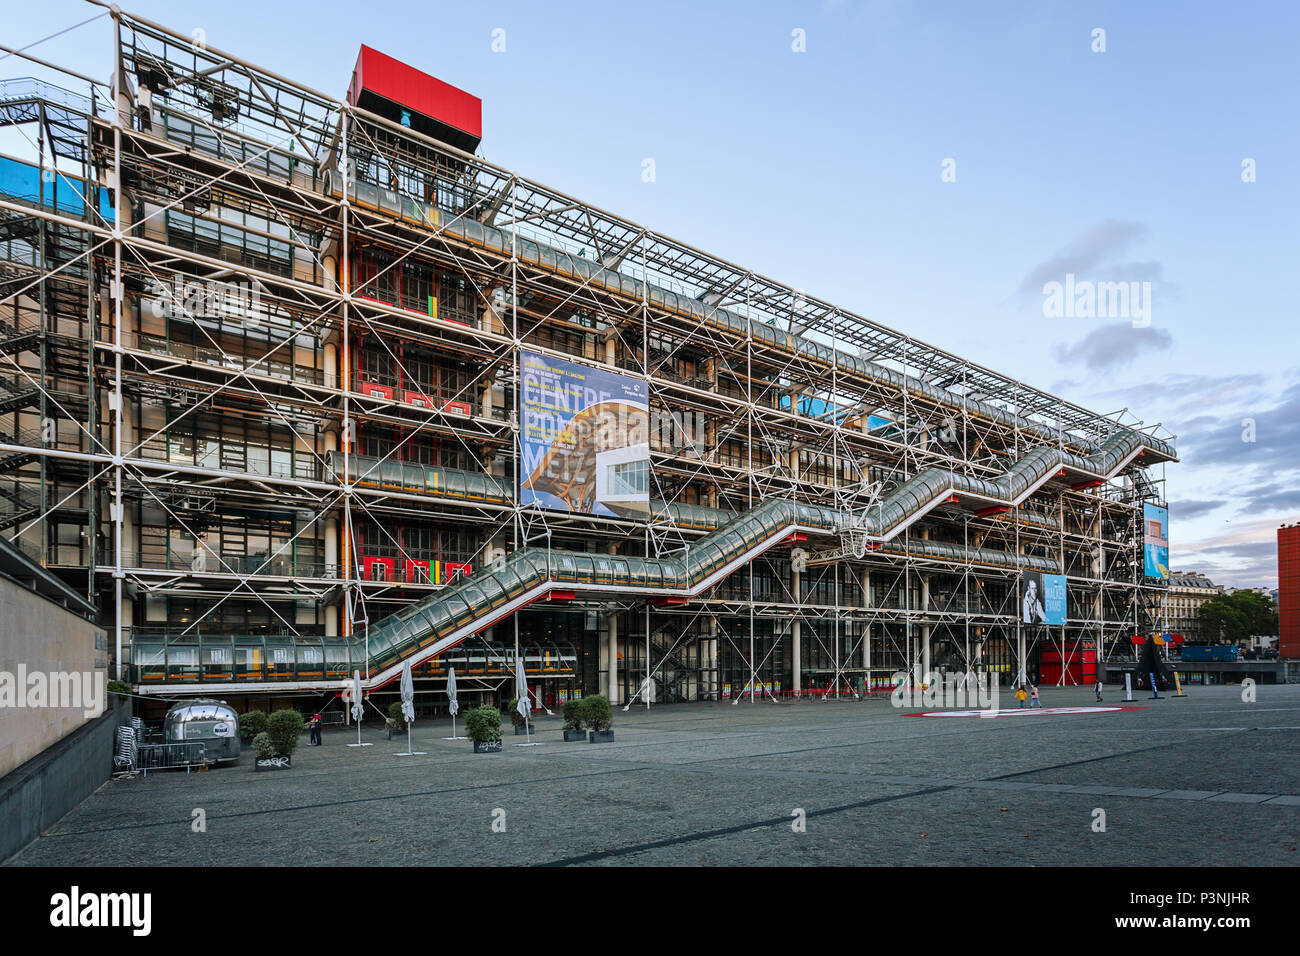 PARIS, FRANCE - 09 AUGUST, 2017: Centre Georges Pompidou. Architects Richard Rogers and Renzo Piano was designed in style of high-tech architecture. Stock Photo